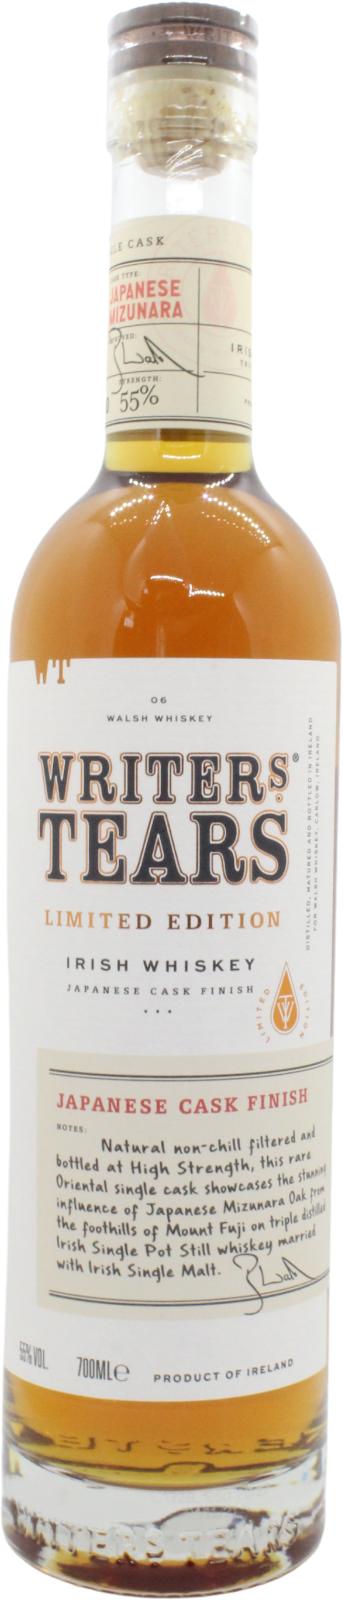 Writers' Tears Limited Edition